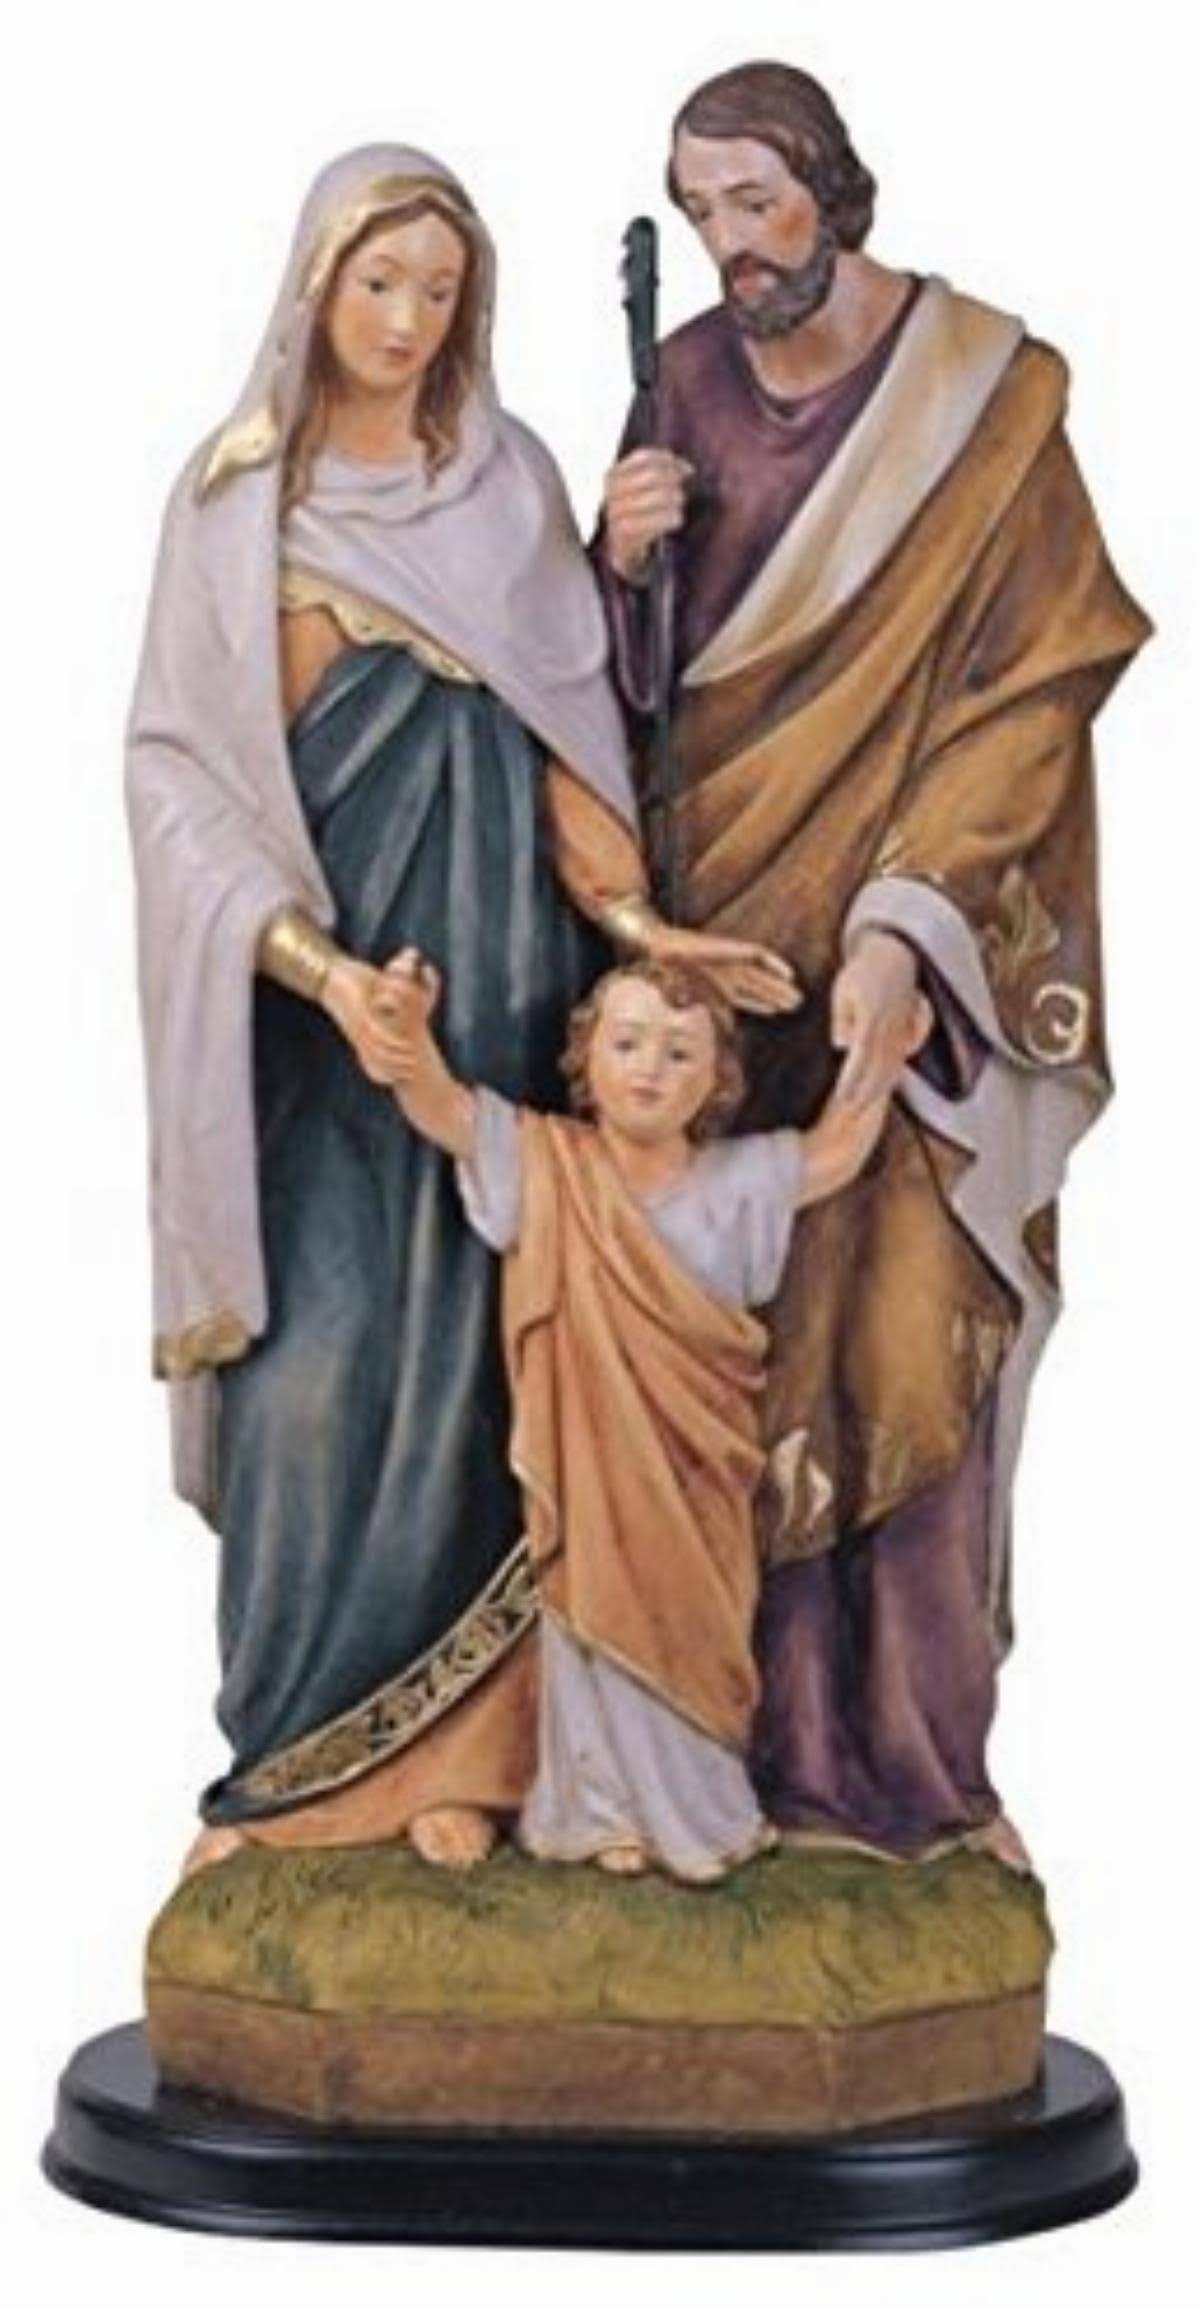 George S. Chen Imports SS-G-212.07 Holy Family Jesus Mary Joseph Religious Figurine Decoration 12